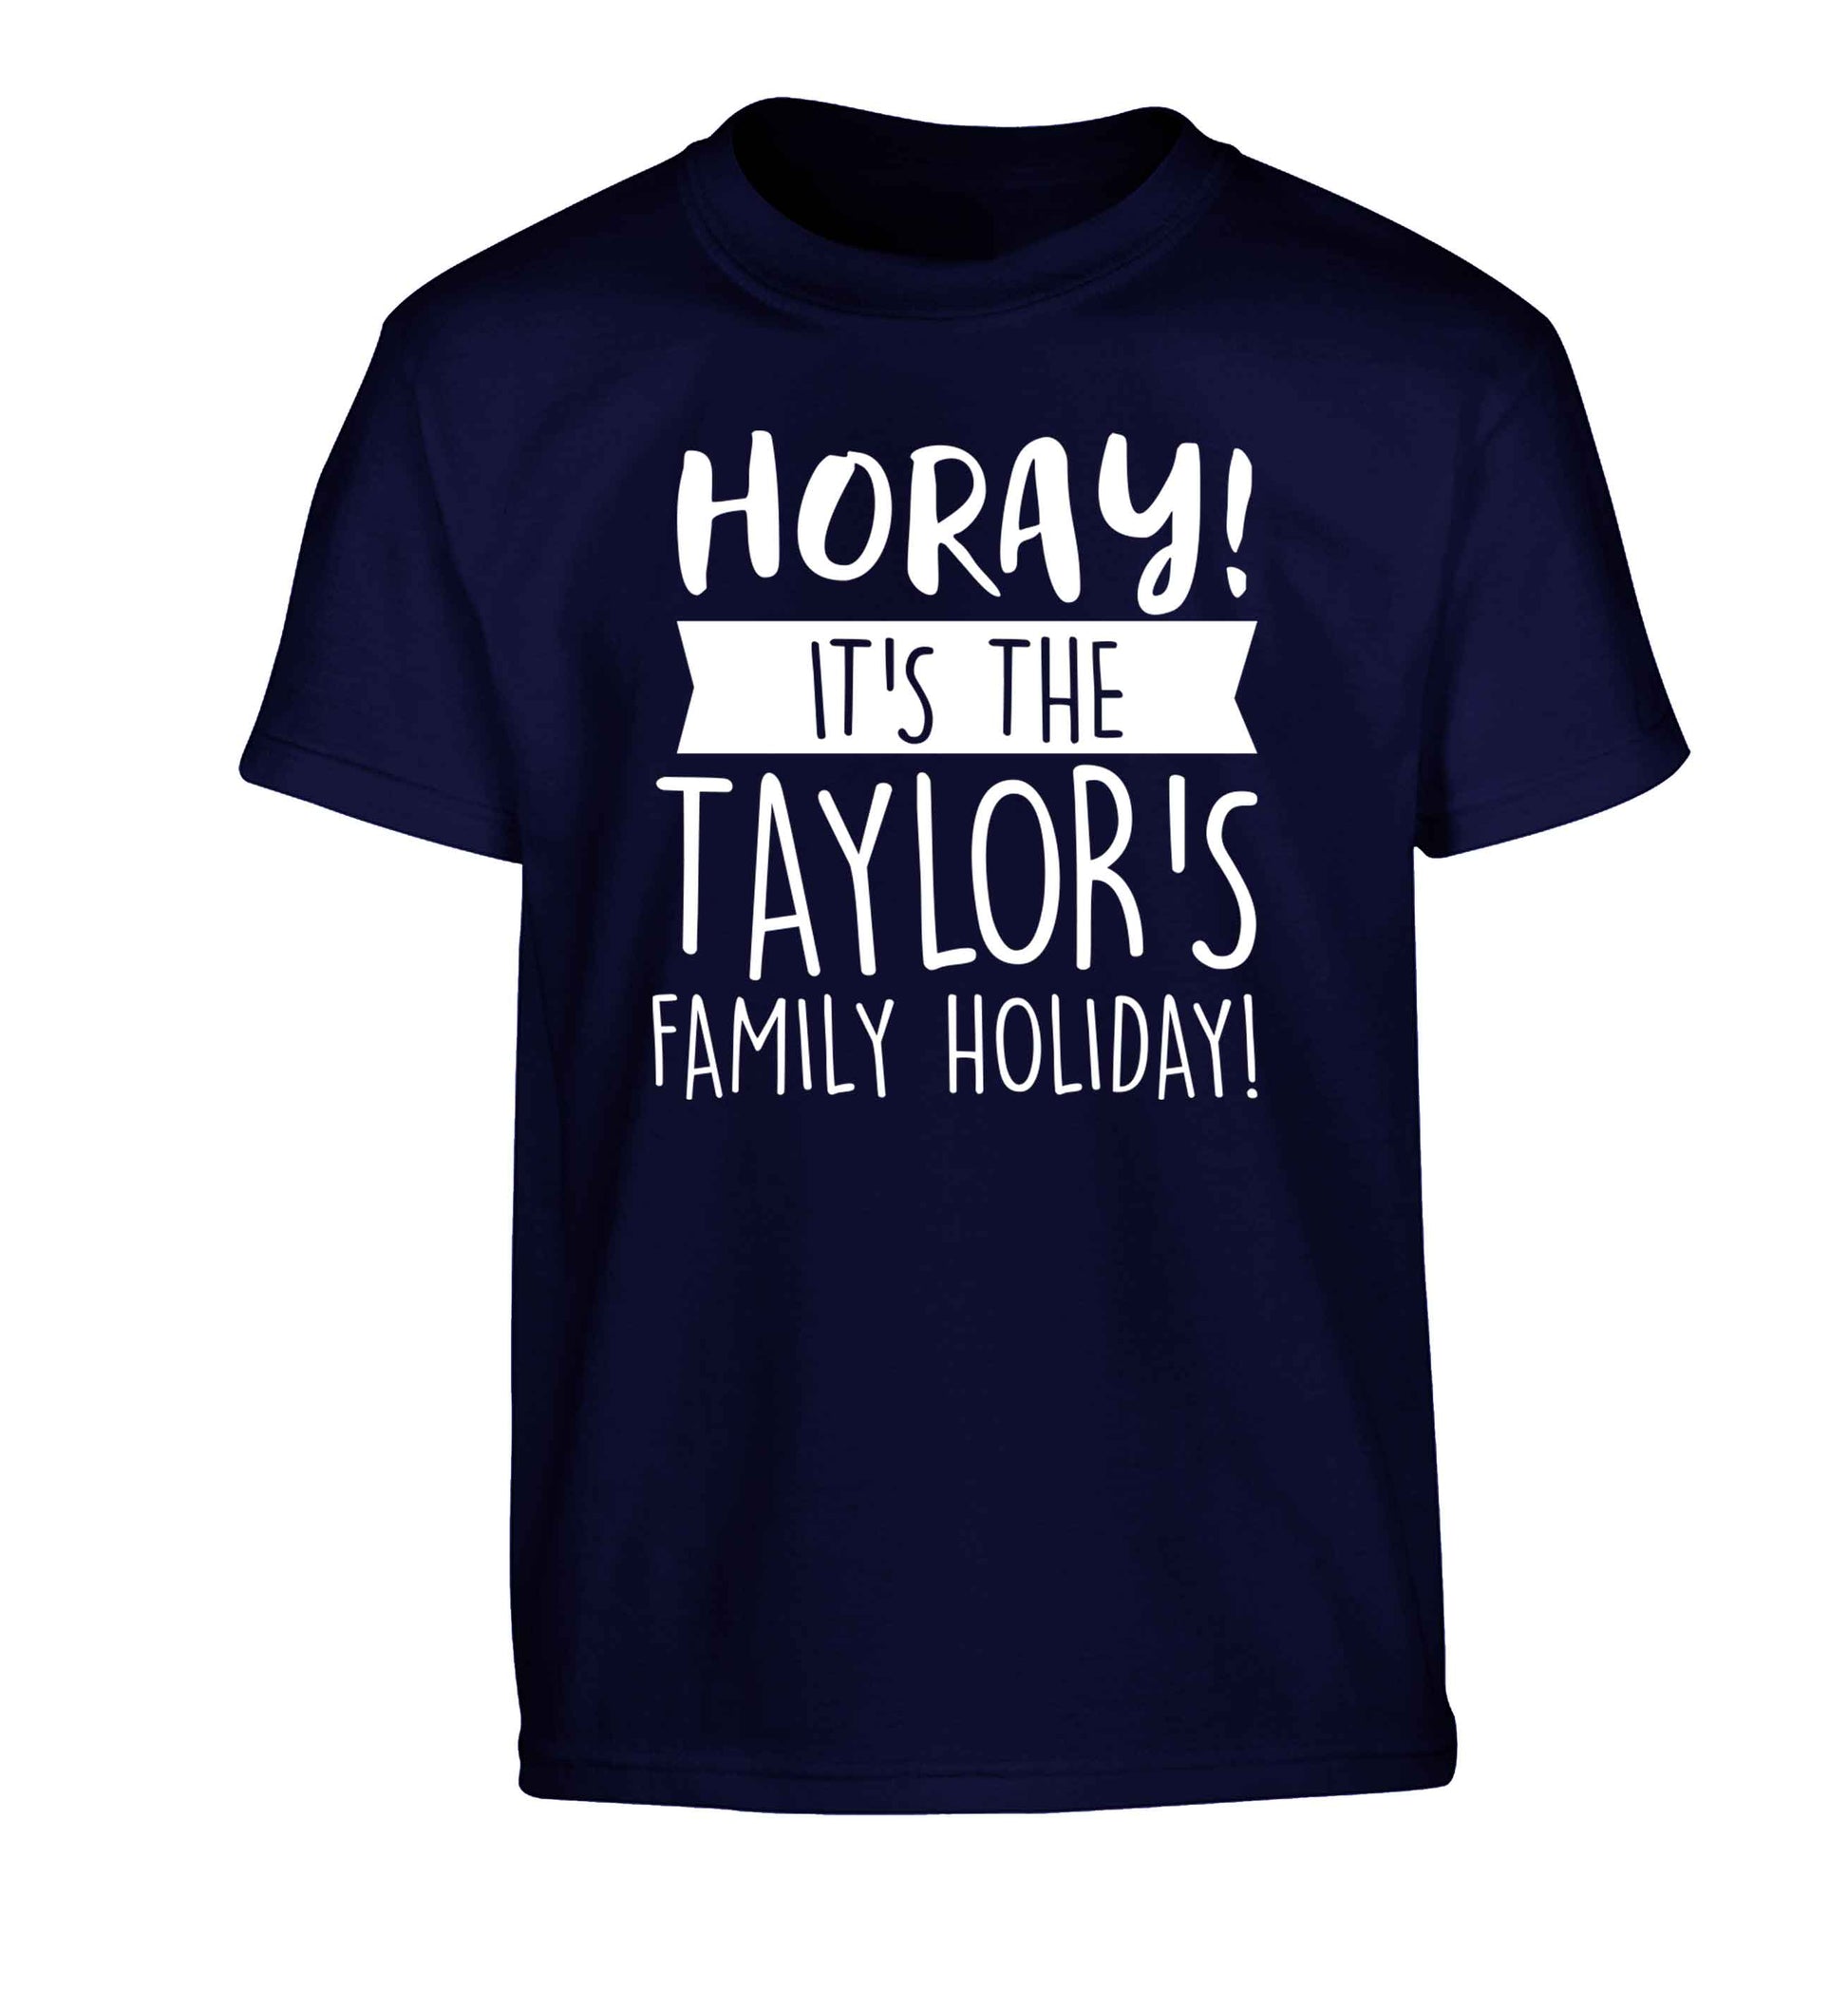 Horay it's the Taylor's family holiday! personalised item Children's navy Tshirt 12-13 Years